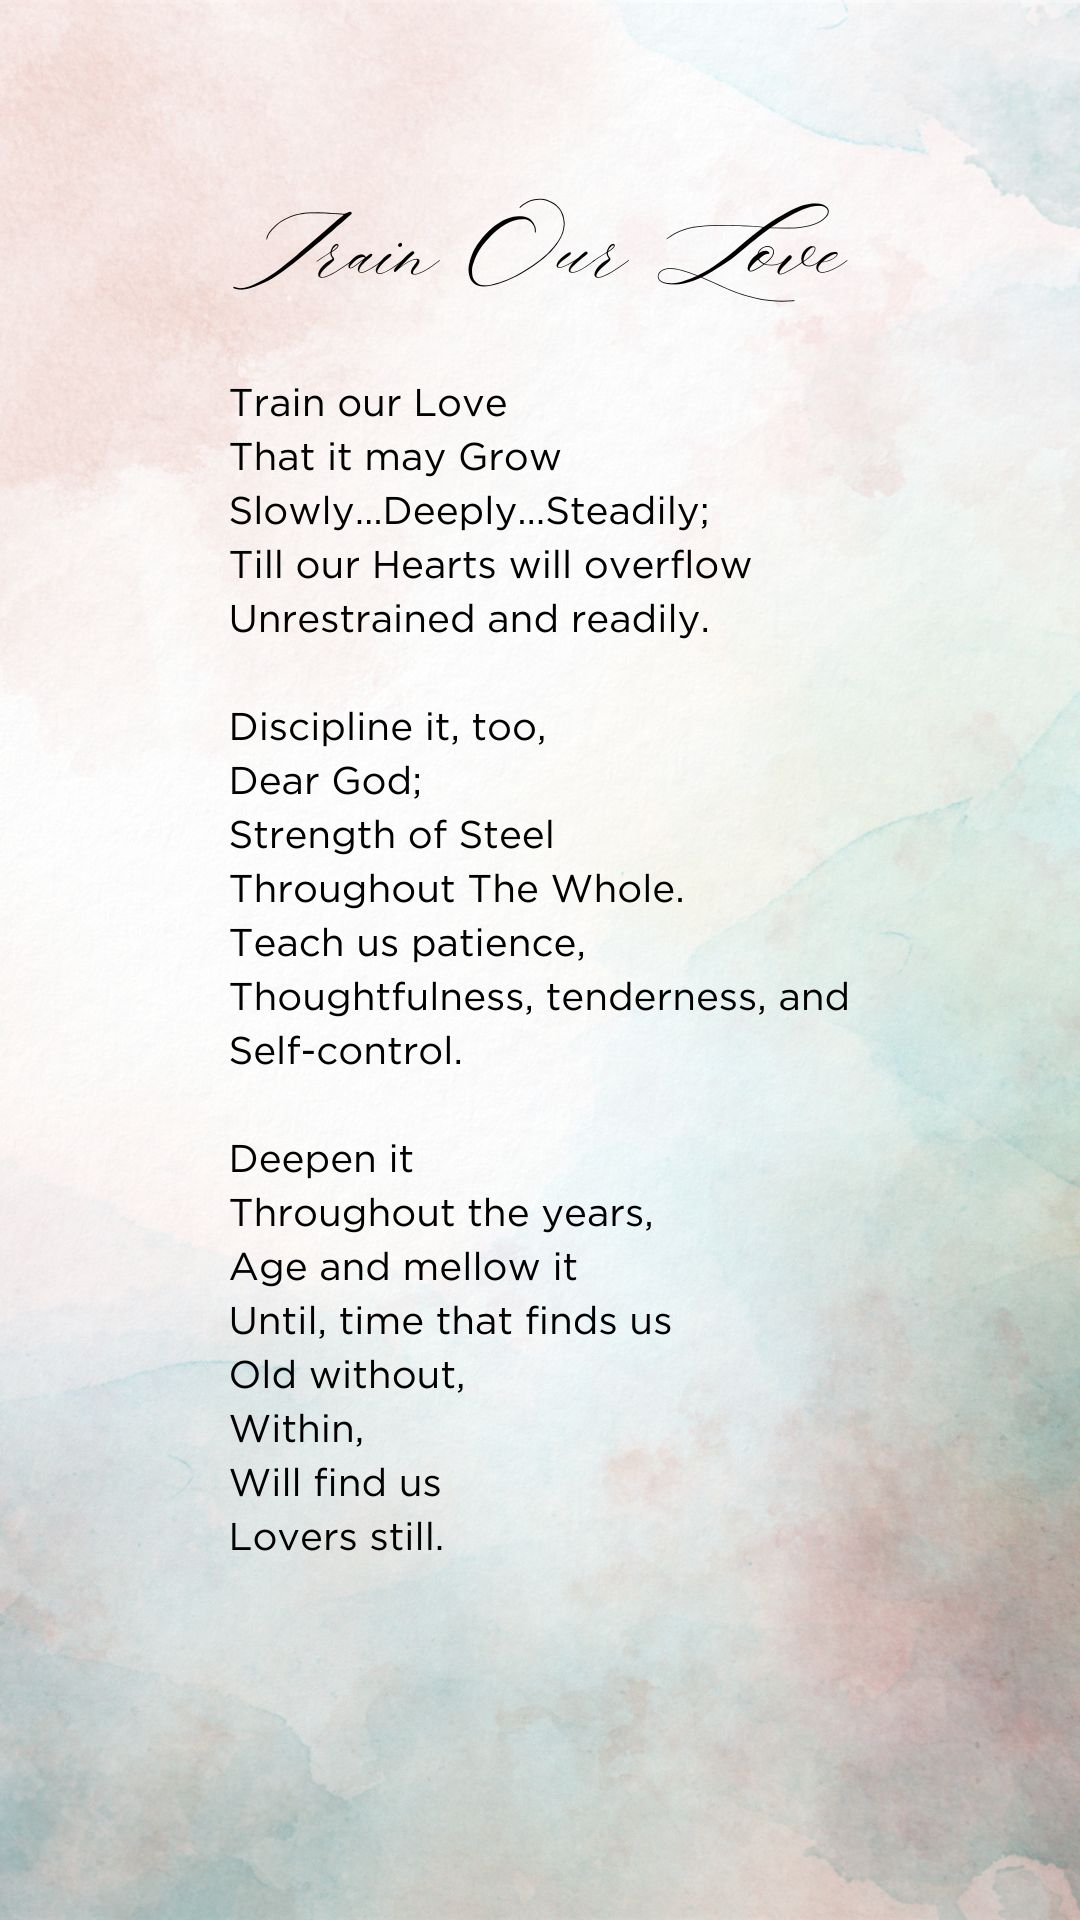 Love Poems from Ruth Bell Graham